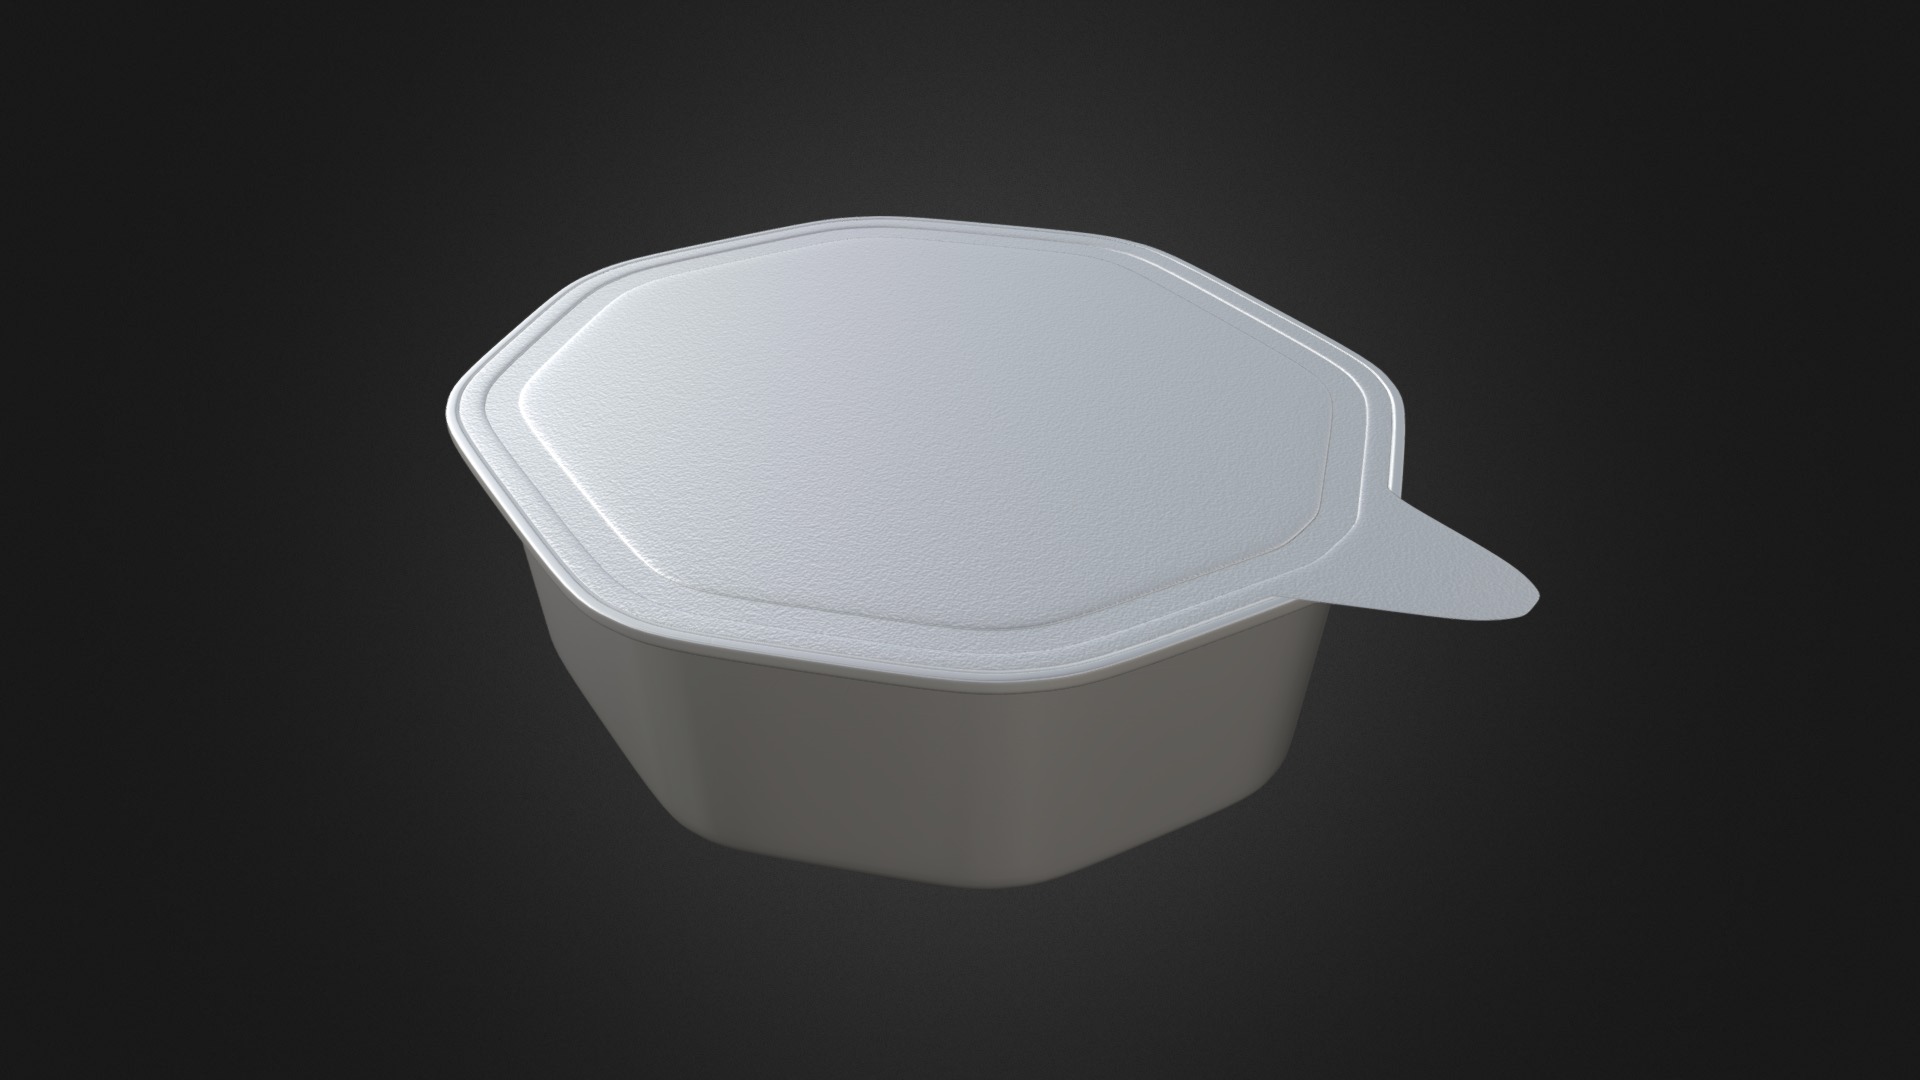 3D model cat dog food package 03 - This is a 3D model of the cat dog food package 03. The 3D model is about a white bowl with a black background.